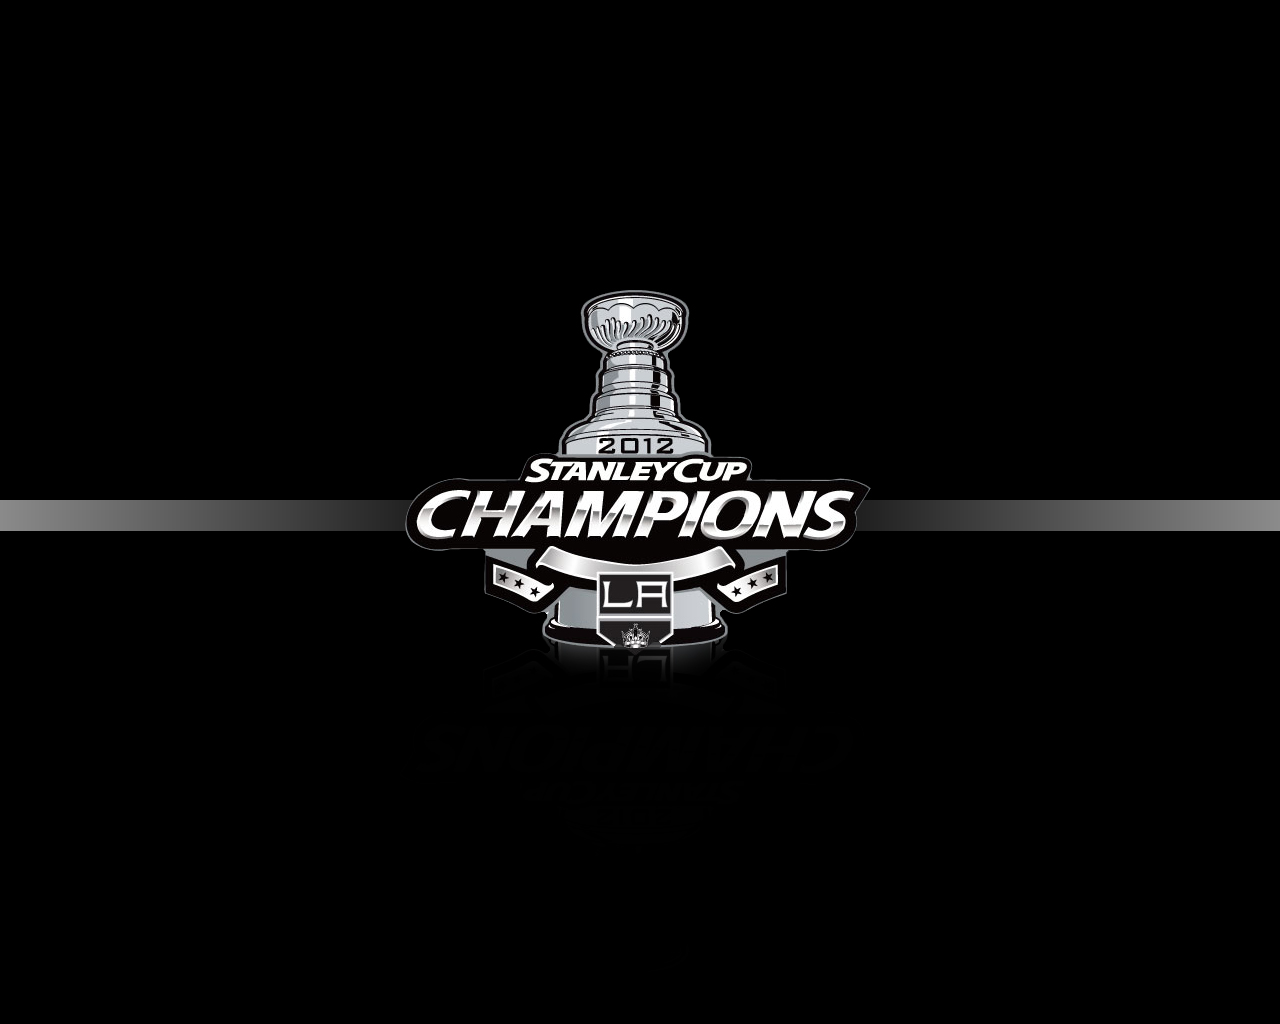 Wallpaper Background More La Kings Stanley Cup Champions